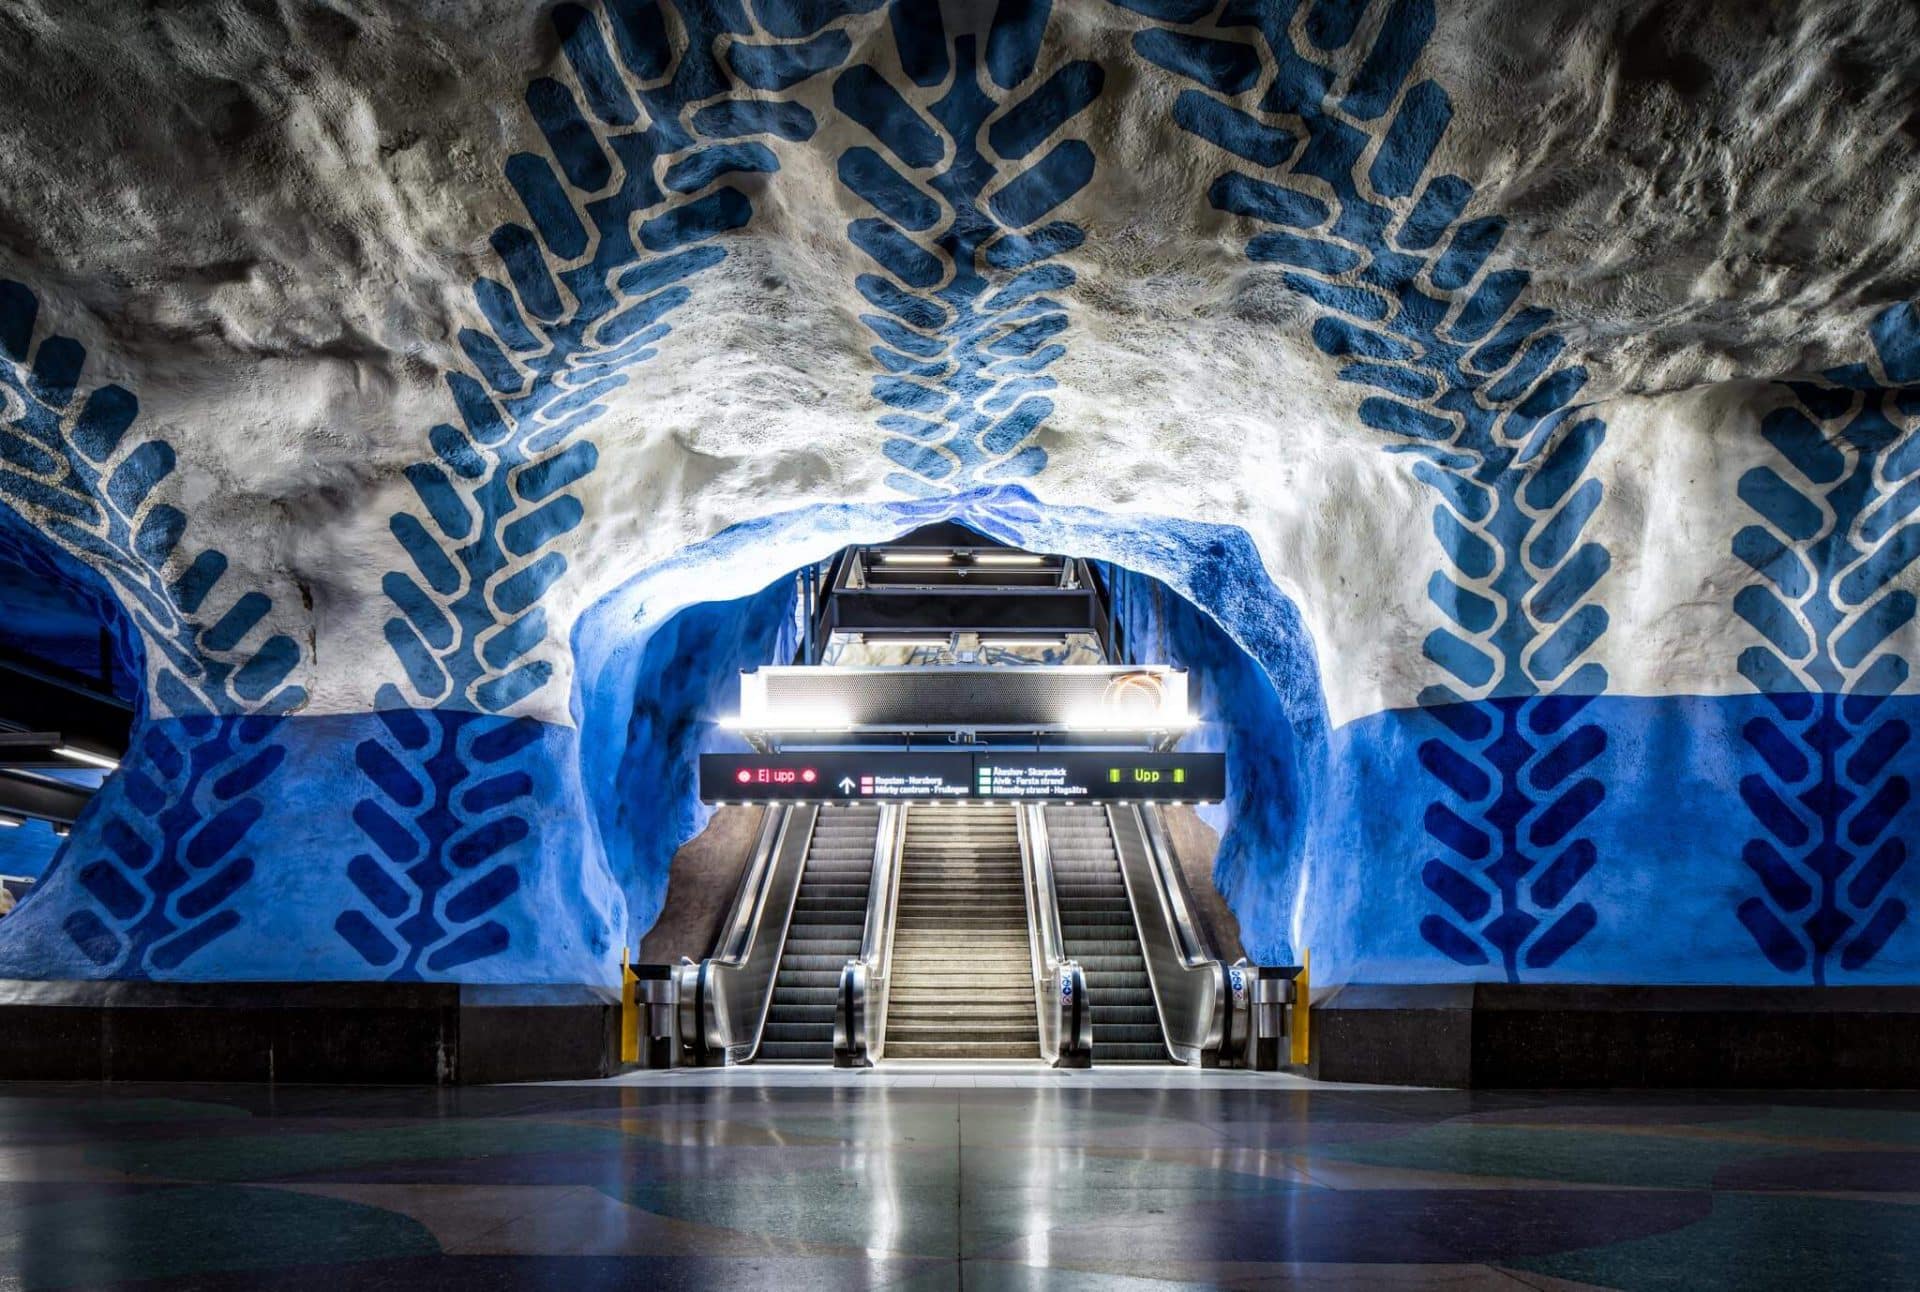 Stockholm subway is the world's largest public art gallery